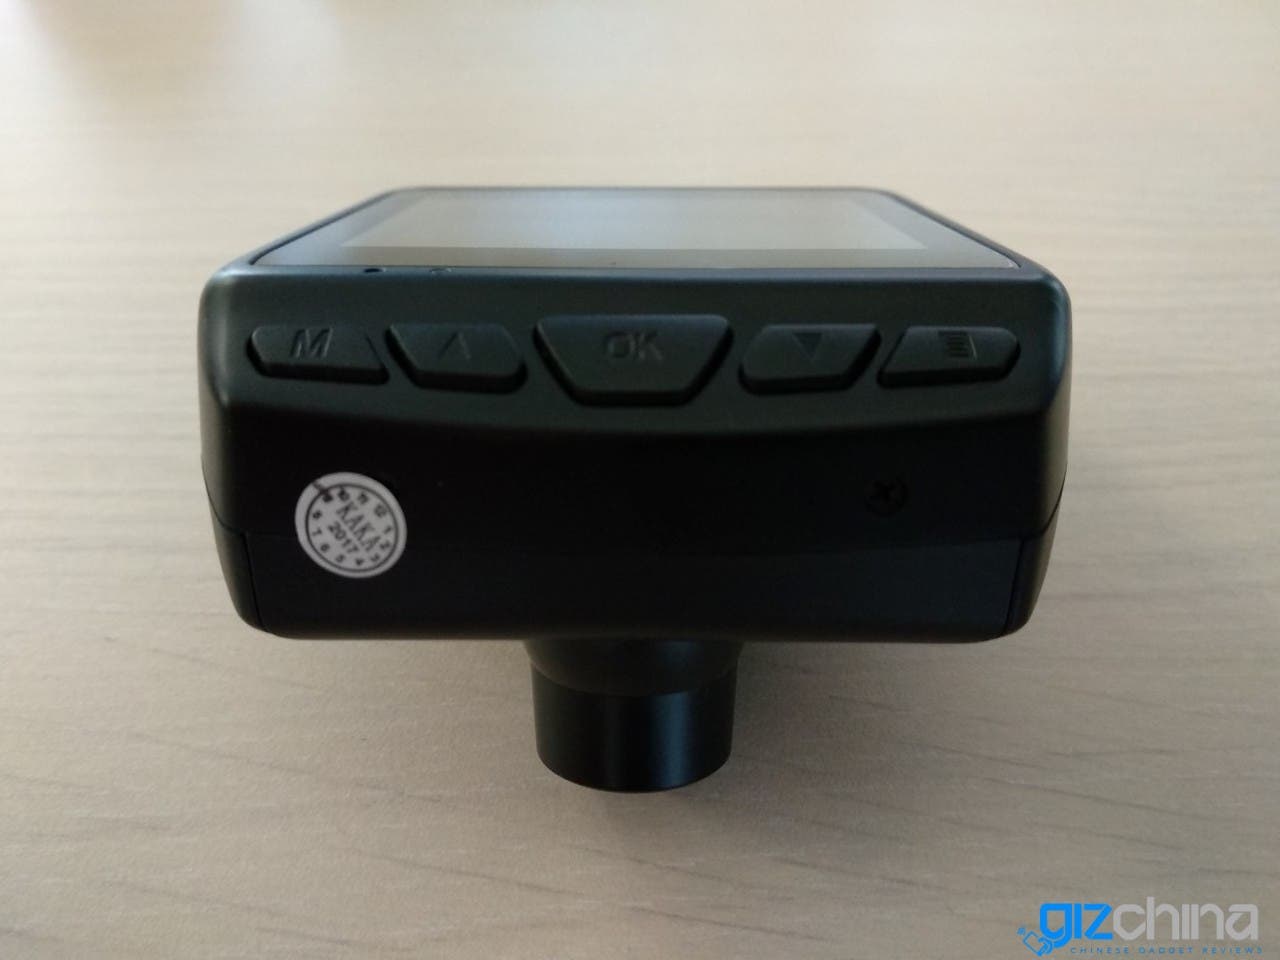 Azdome DAB211 Car Dashcam Night Vision Feature at Work (Video